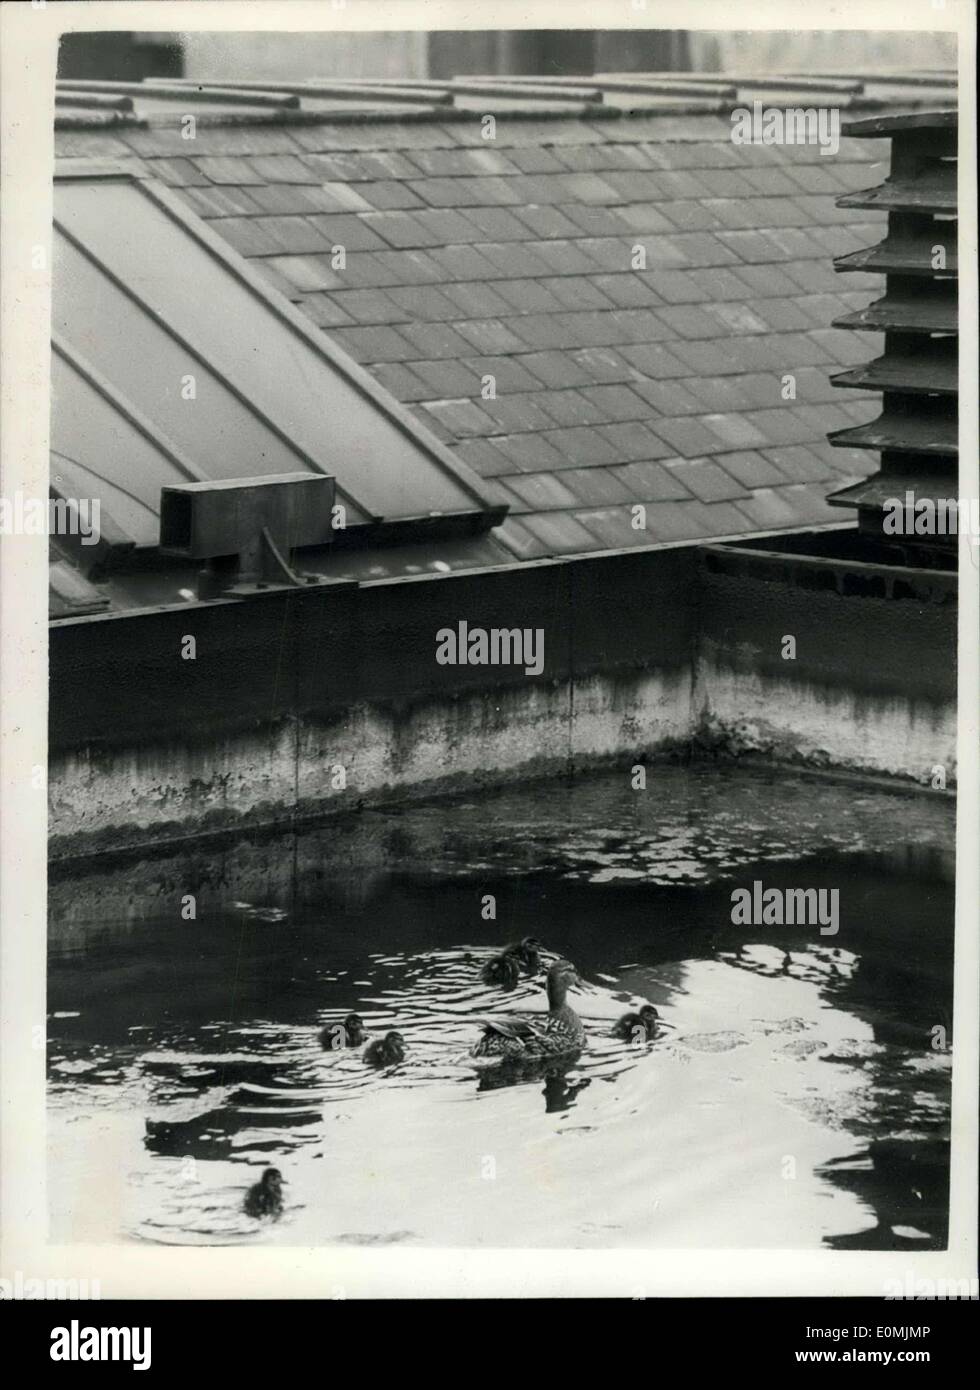 Jun. 15, 1955 - ''Sally'' the duck and her brood make their home in a water tank on a Clearkenwell Distillery: ''Sally'' the duck - with her brood of six duckling just four days old have an unsual home in the form of the water tanks on the roof of a distillery in Clerkenwell. Photo shows ''Sally'' and her ducklings swimming in one of the tanks on the Distillery roof this morning. Stock Photo